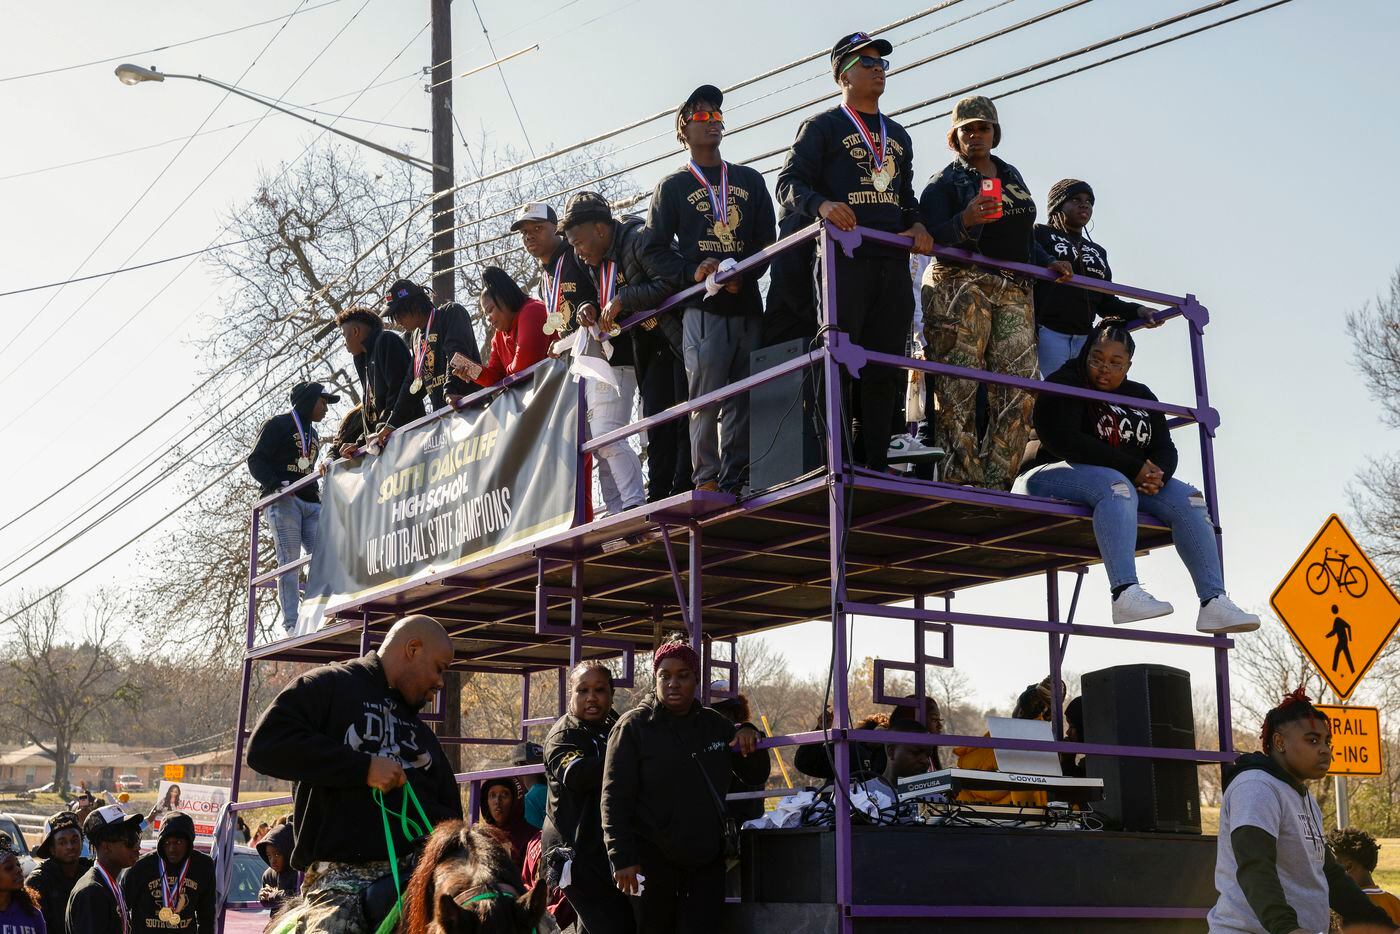 Members of the South Oak Cliff team stand on a two story trailer during a parade celebrating...